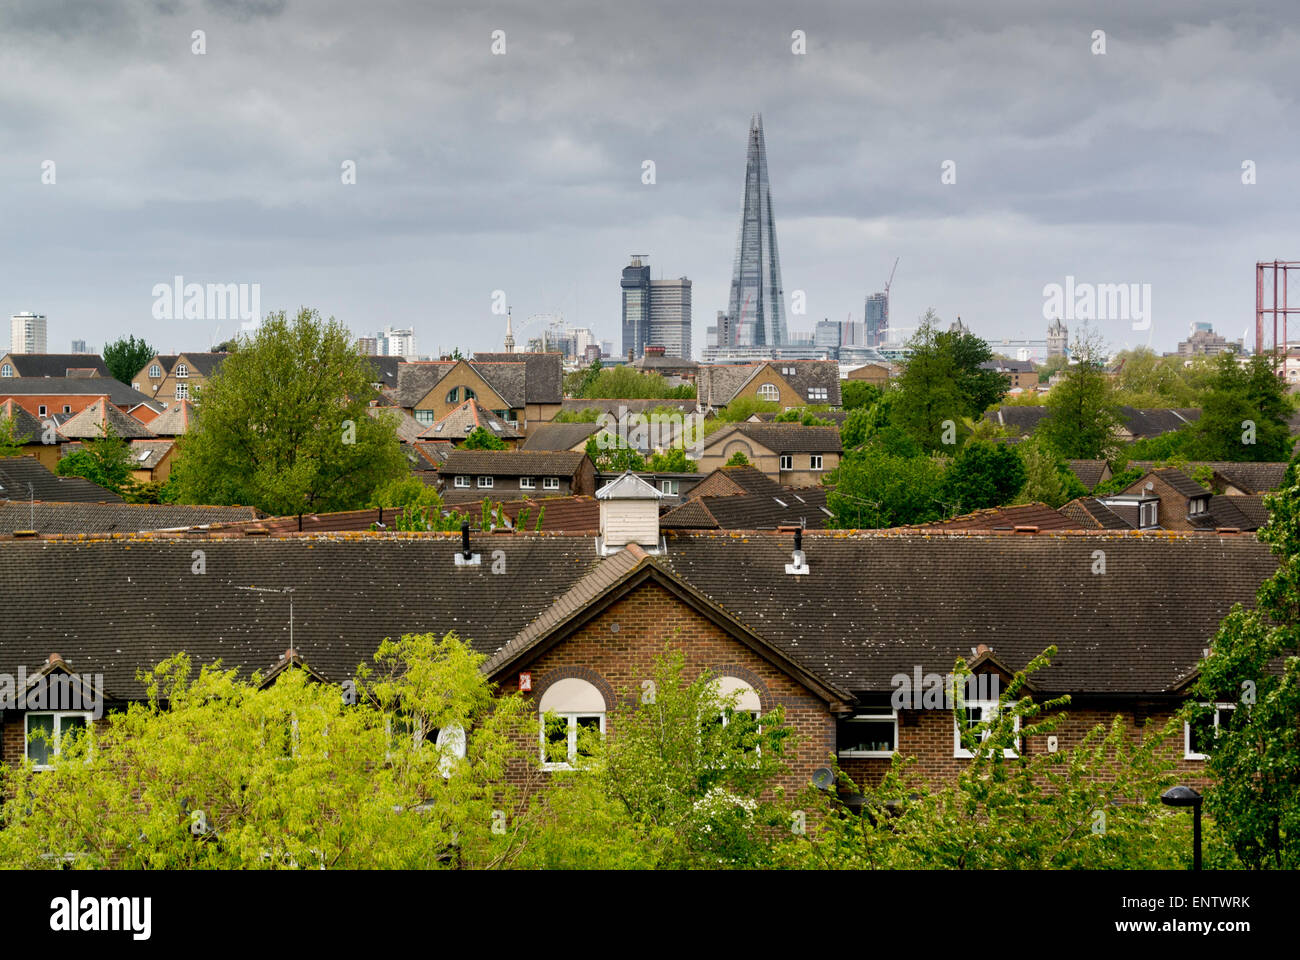 View of The Shard and residential houses from Stave Hill, Rotherhithe, London. Stock Photo